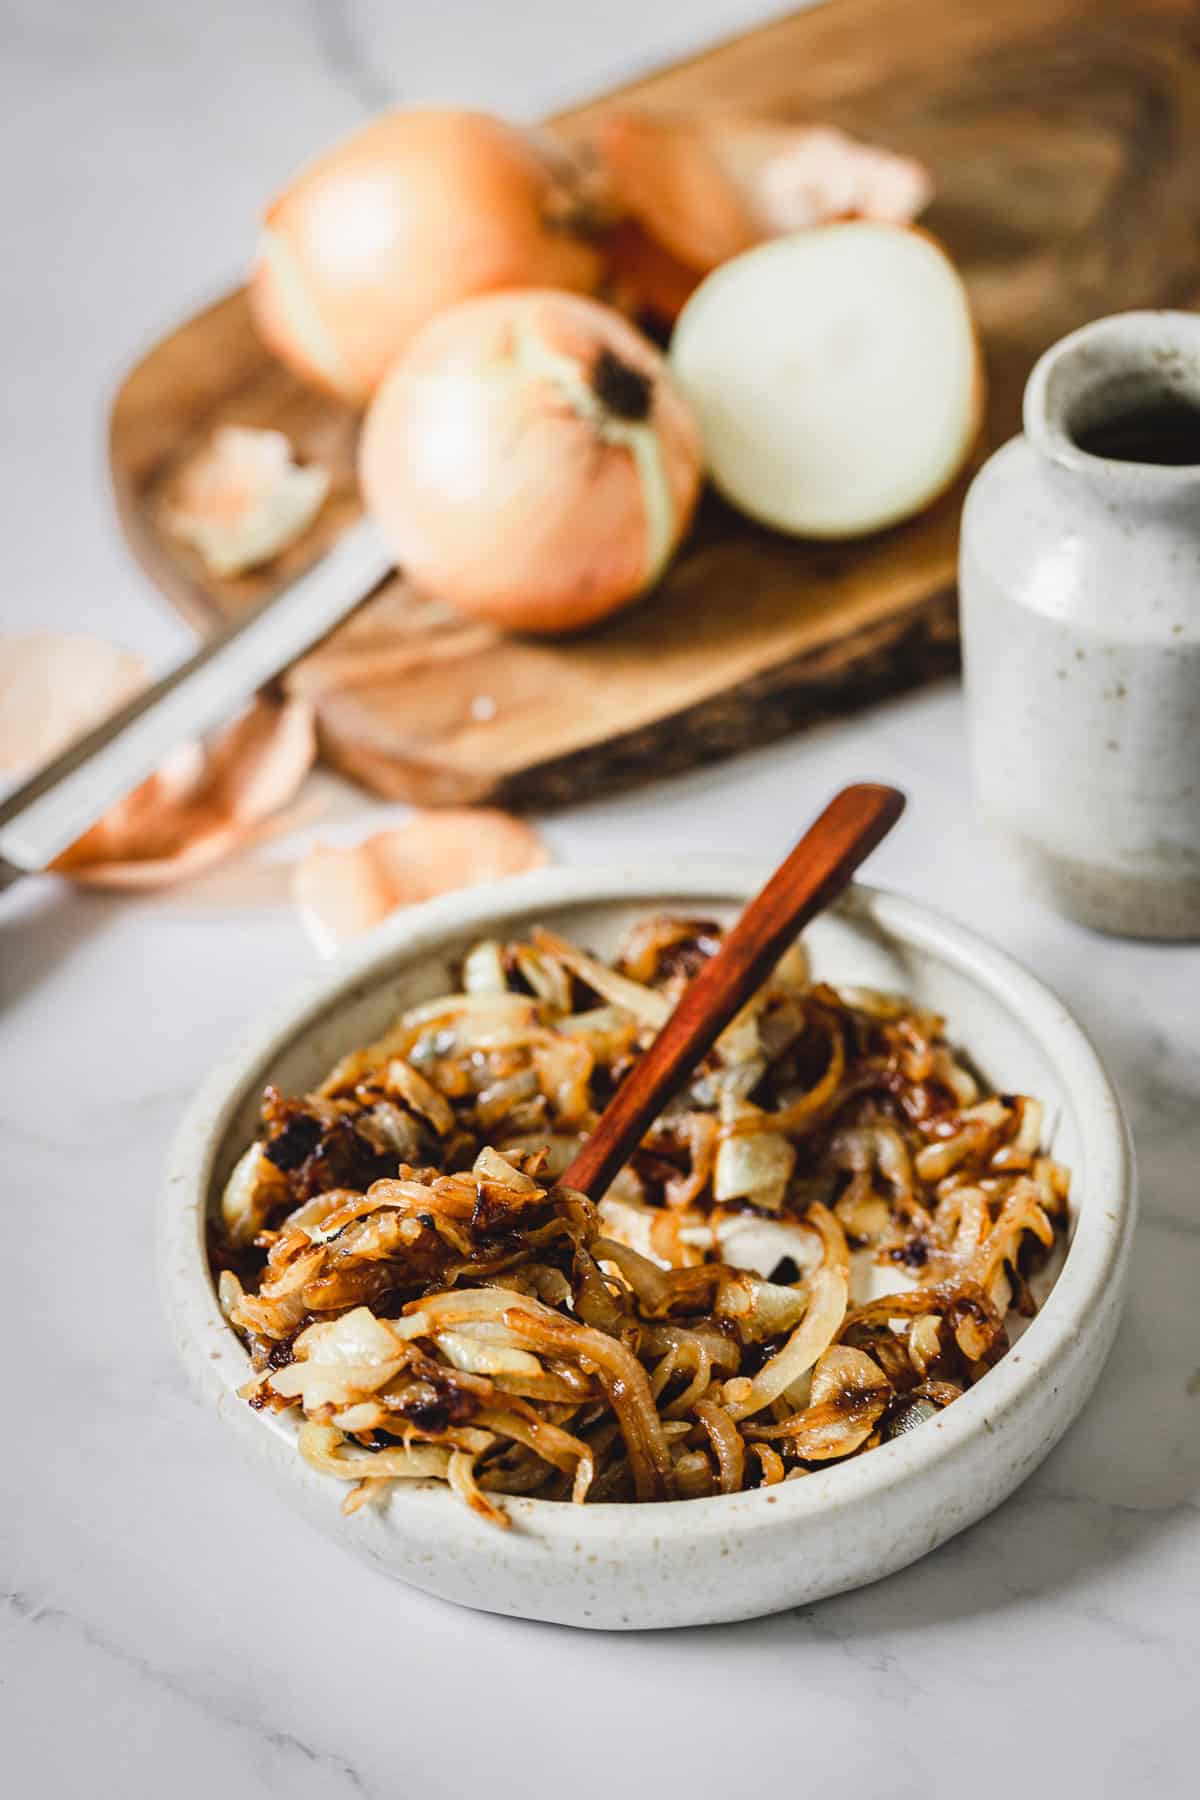 spoon in bowl with caramelized onions